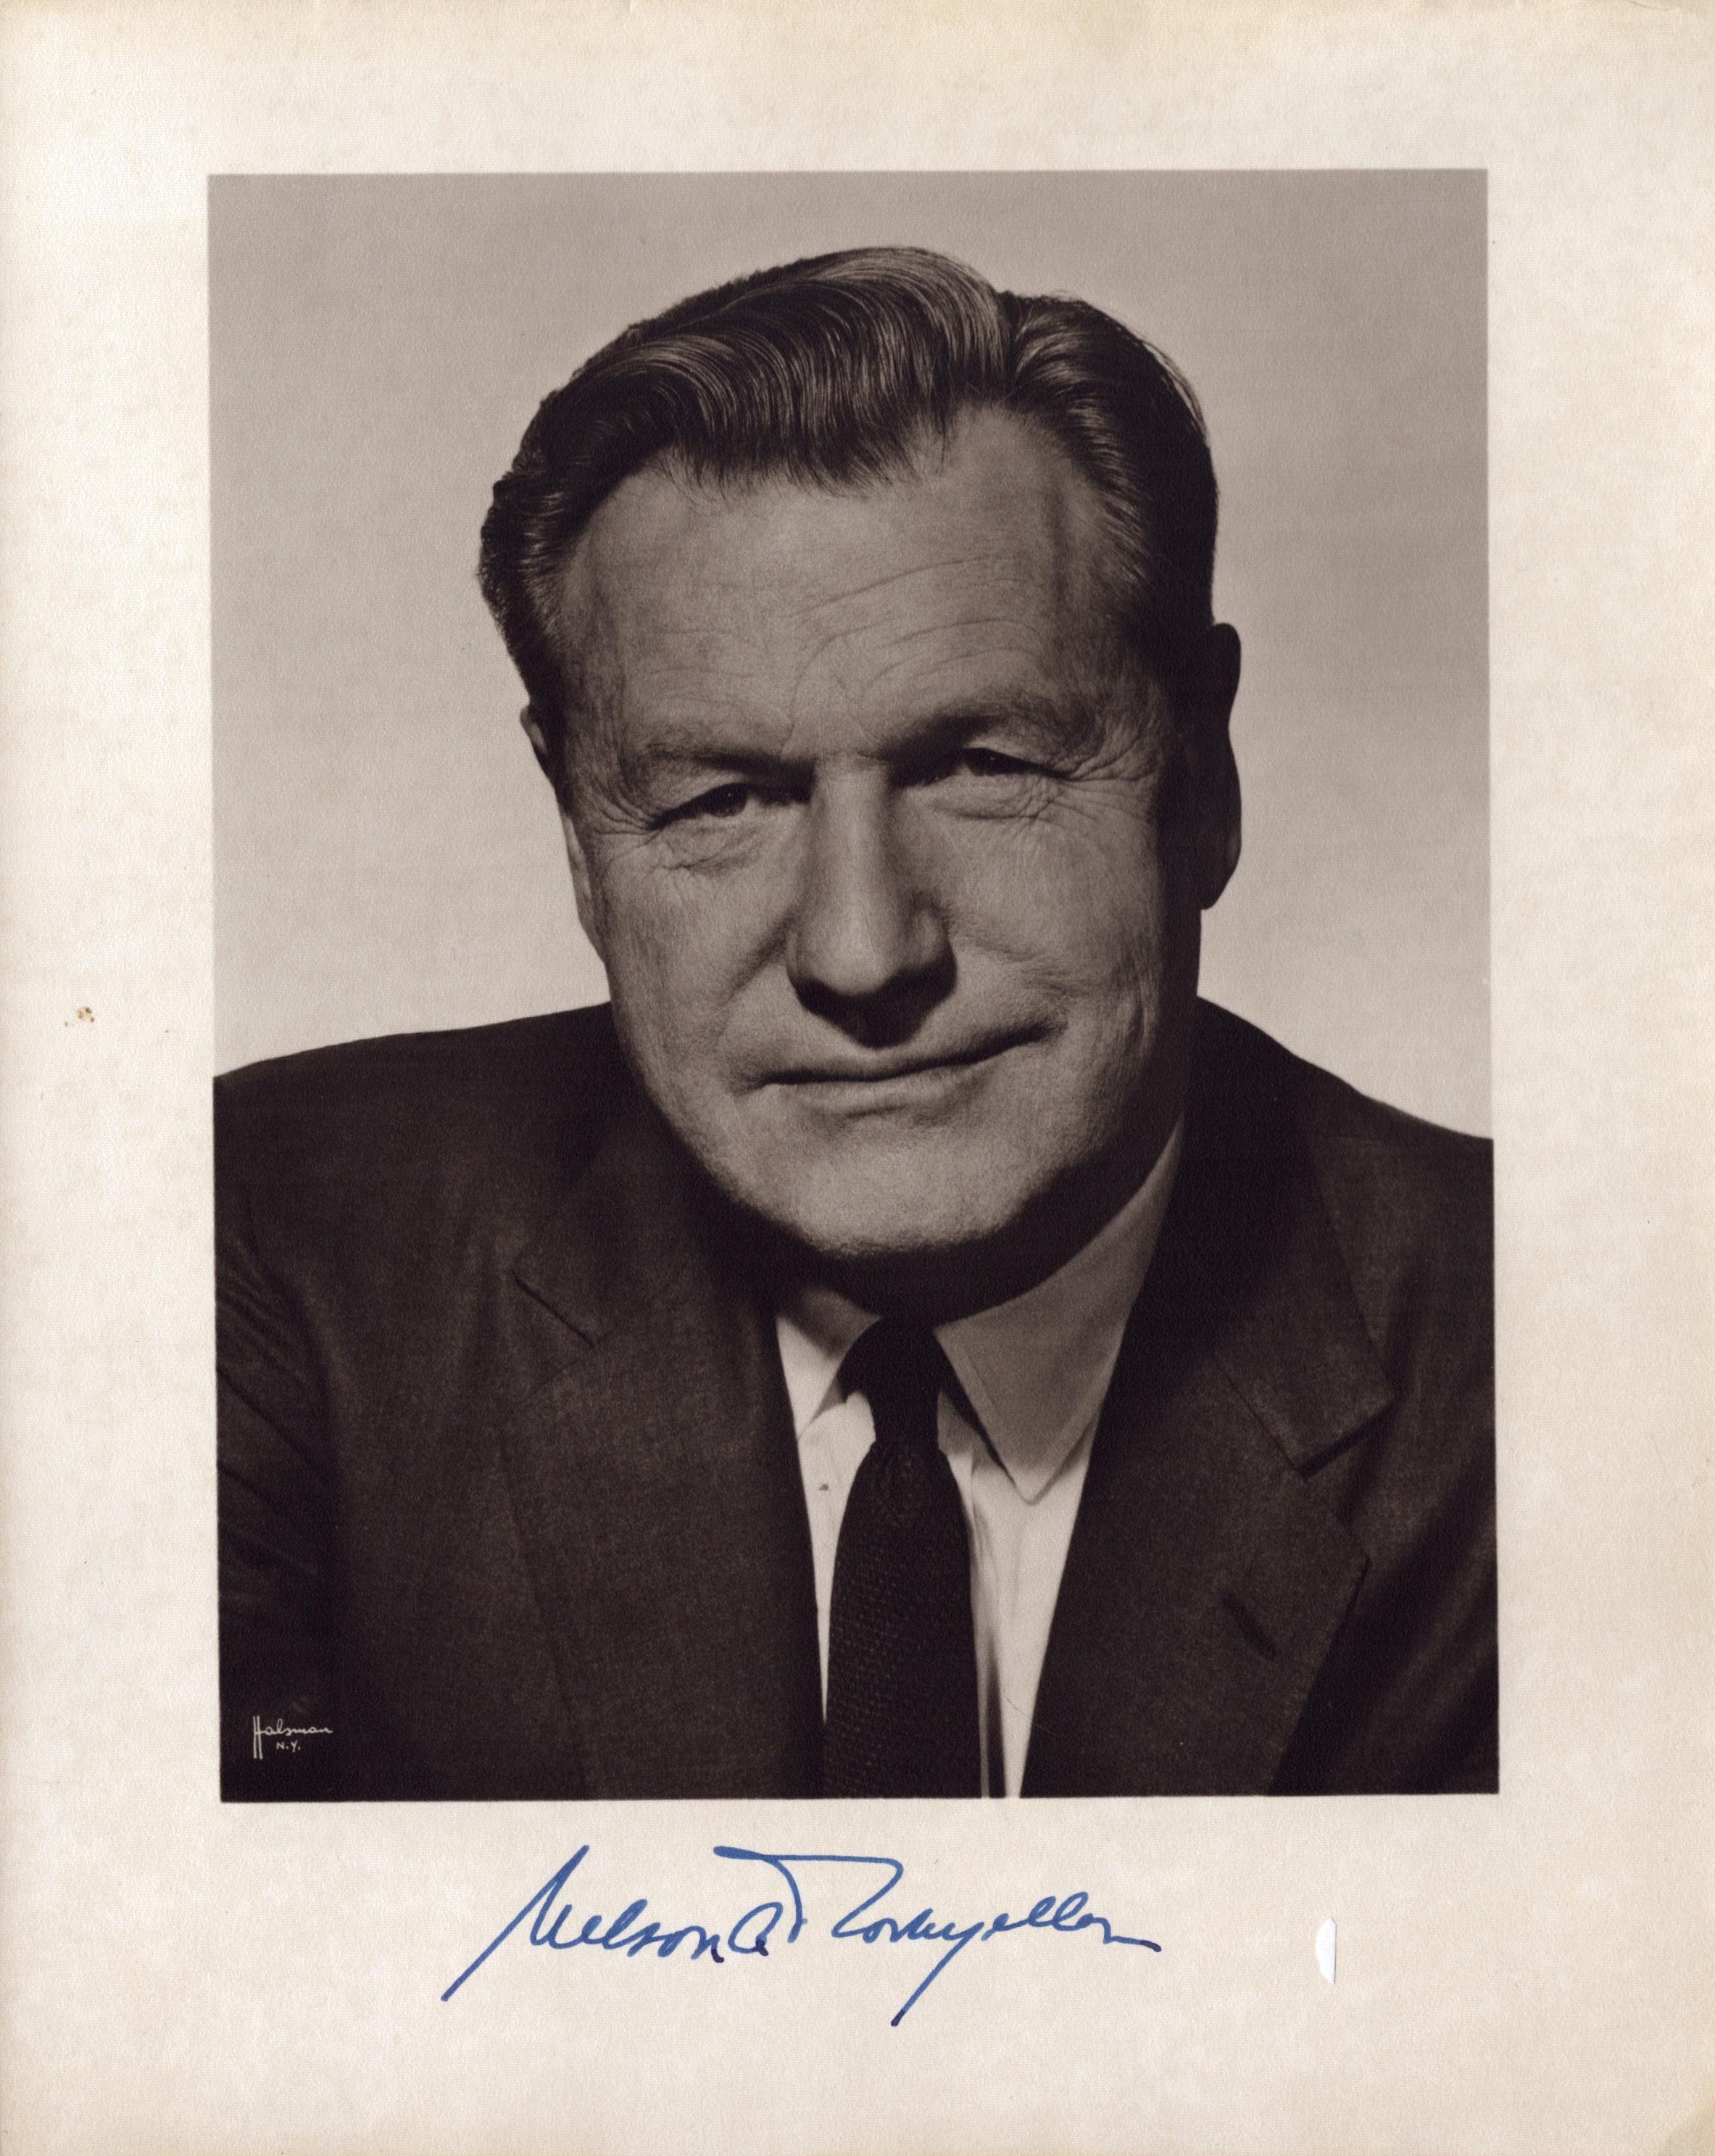 Nelson Rockefeller signed 10x8 inch black and white photo. Good Condition. All autographs come